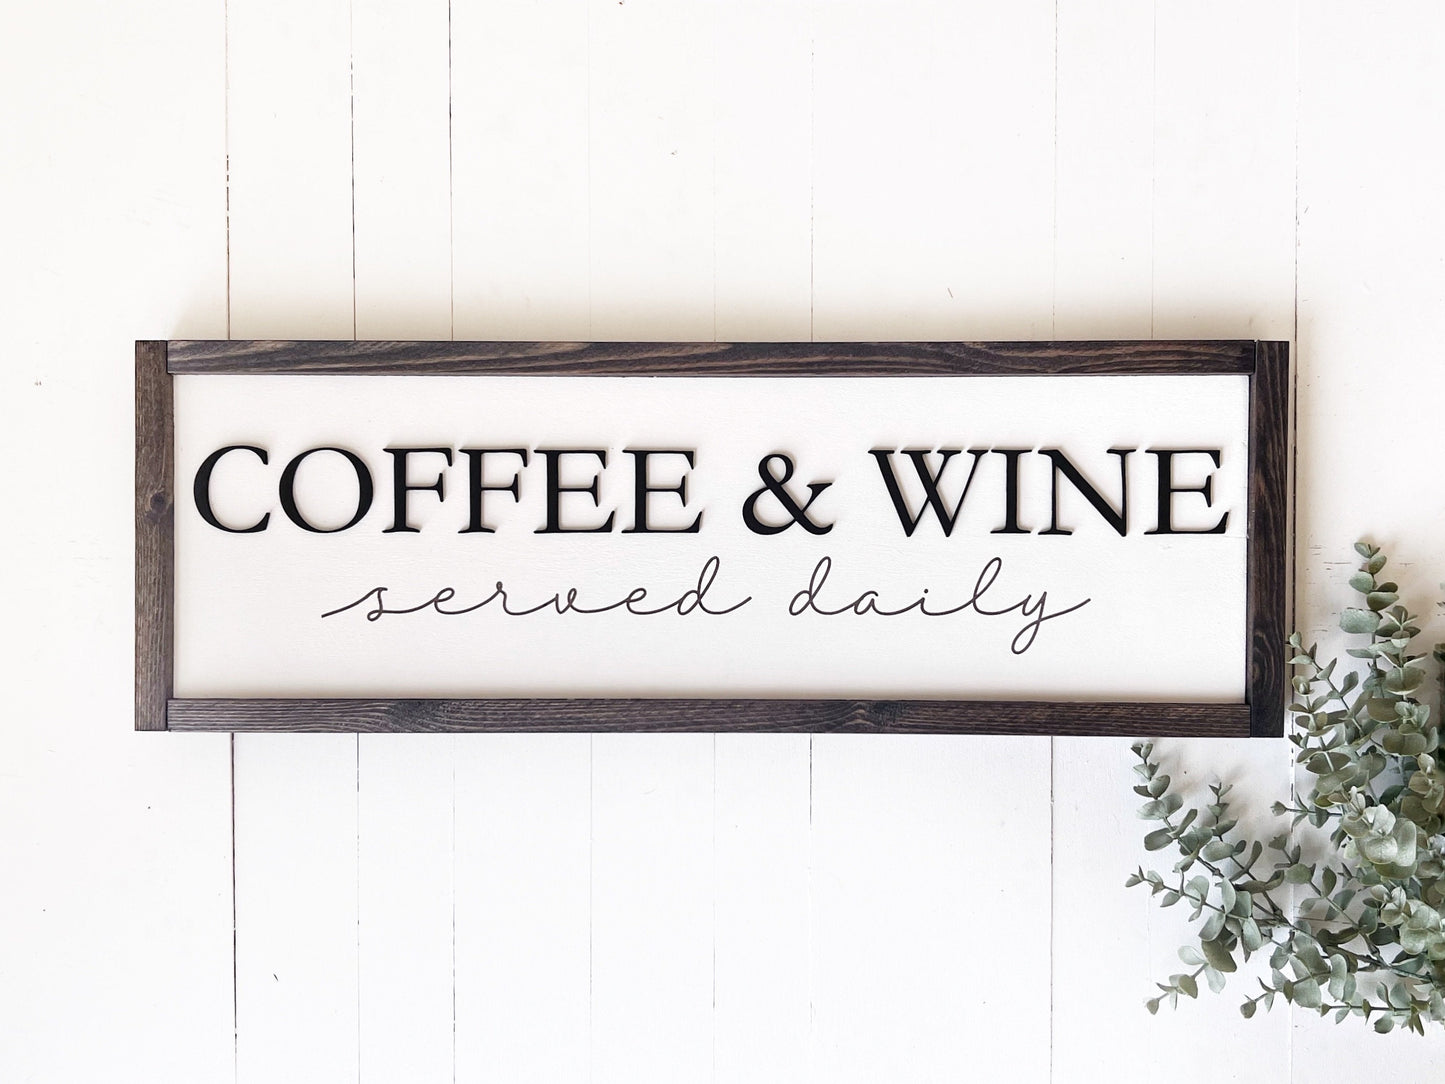 Coffee and Wine Served Daily Sign